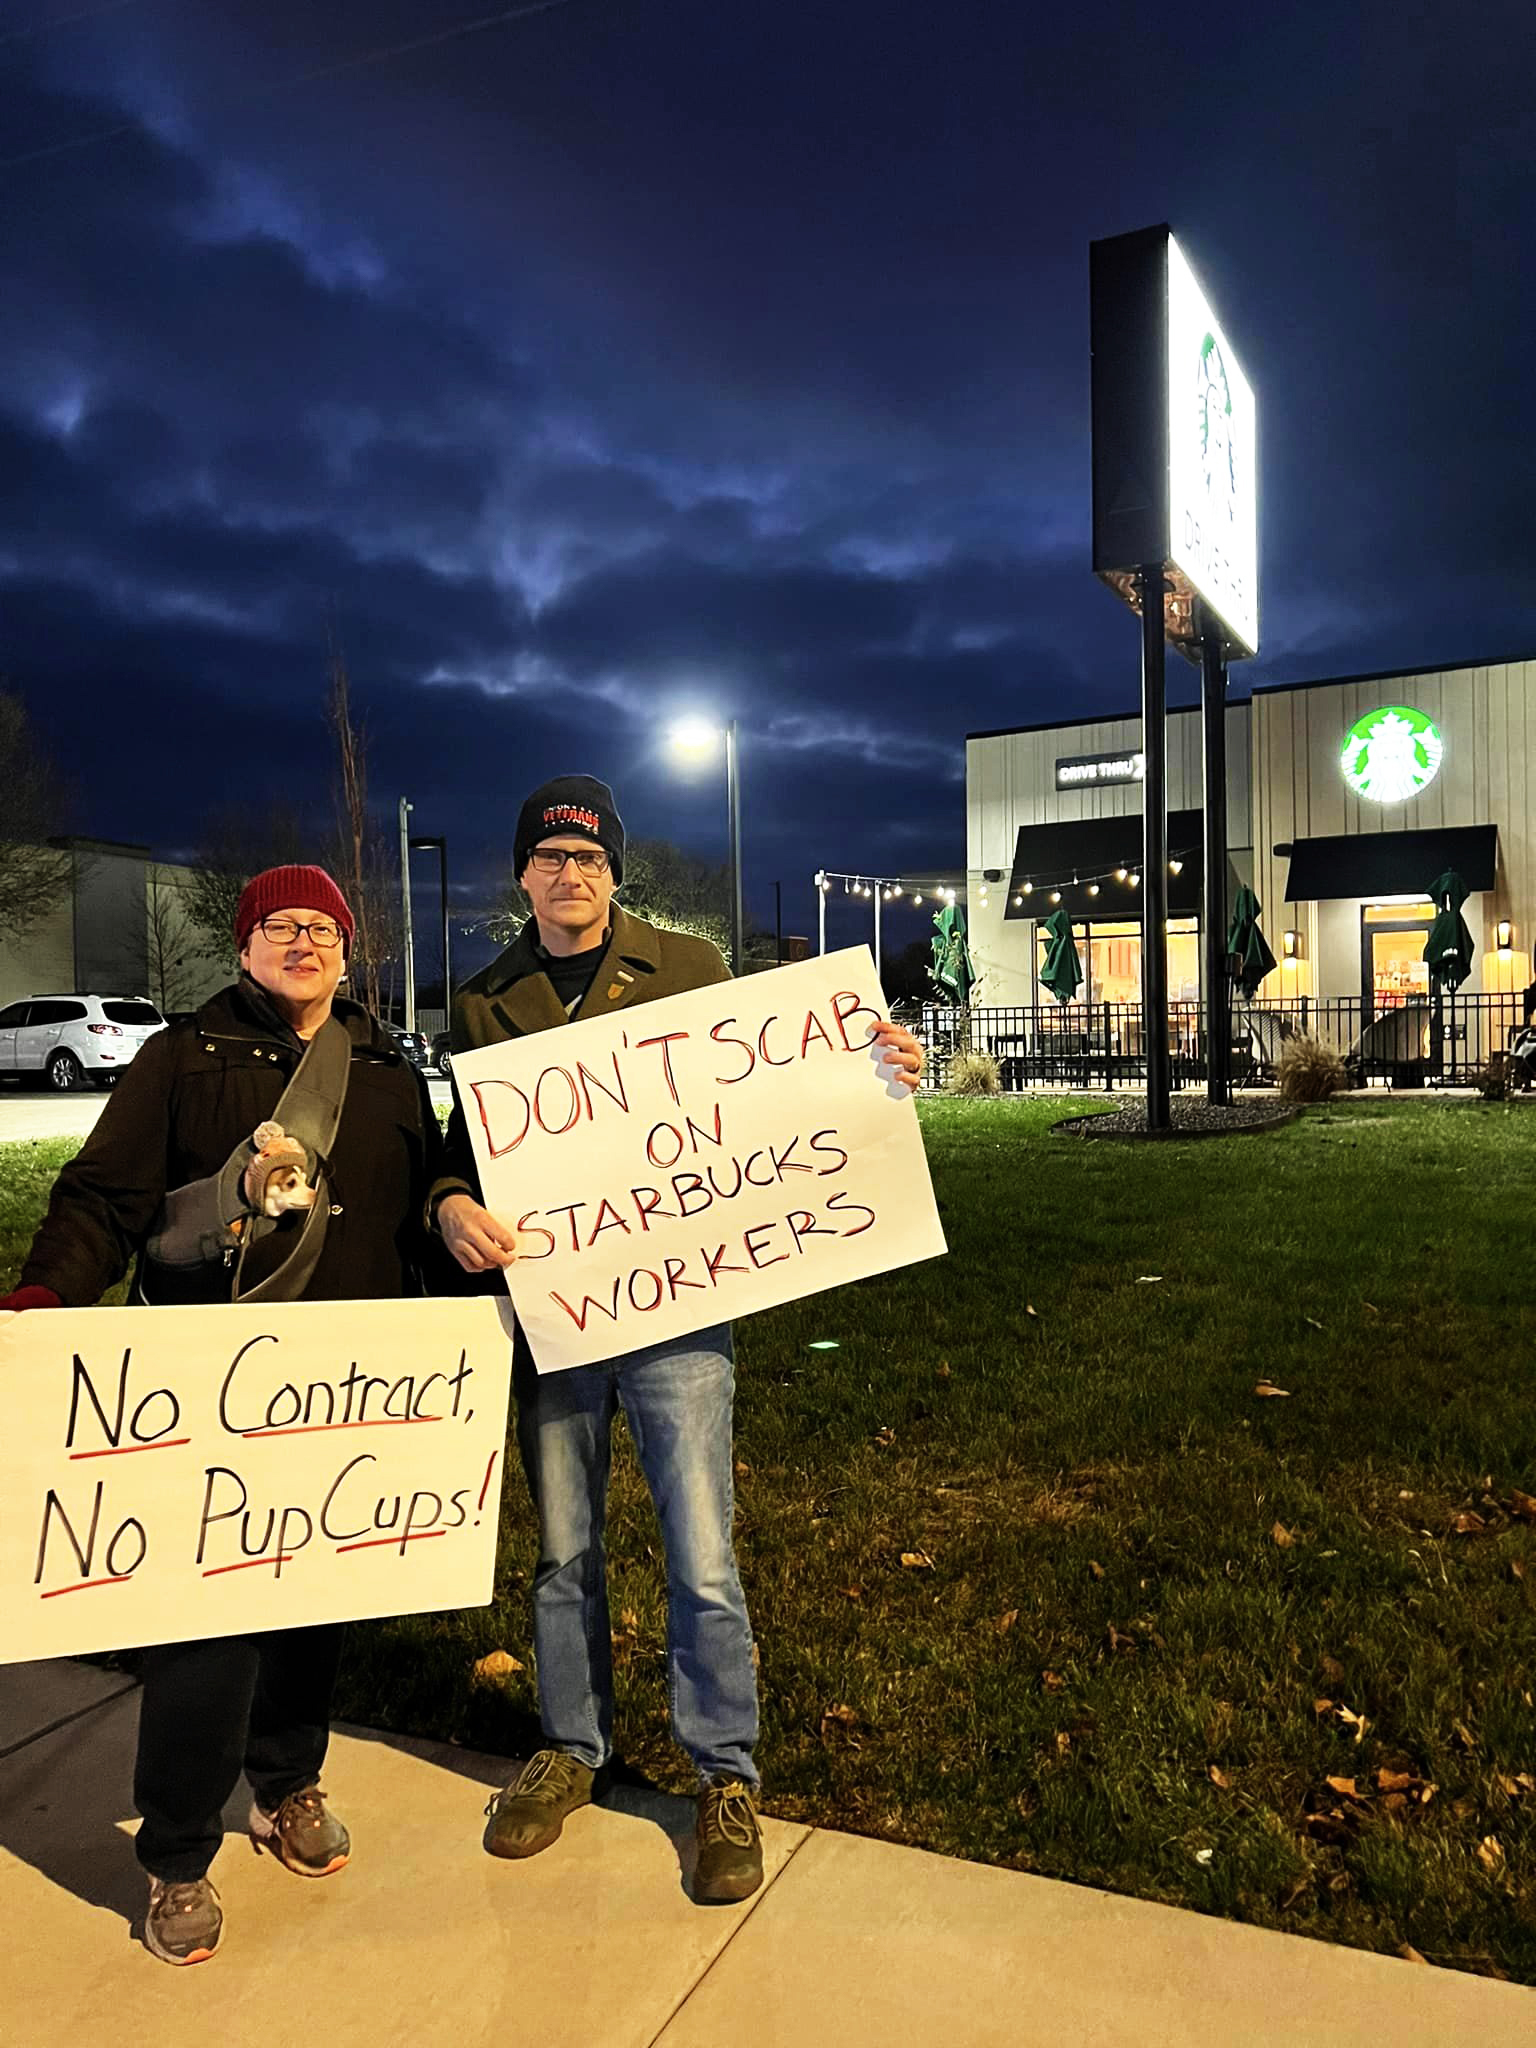 Two picketers, including one with a small dog in a strapon carrier, hold signs that read “No Contract No Pup Cups!” and “DON’T SCAB ON STARBUCKS WORKERS.”